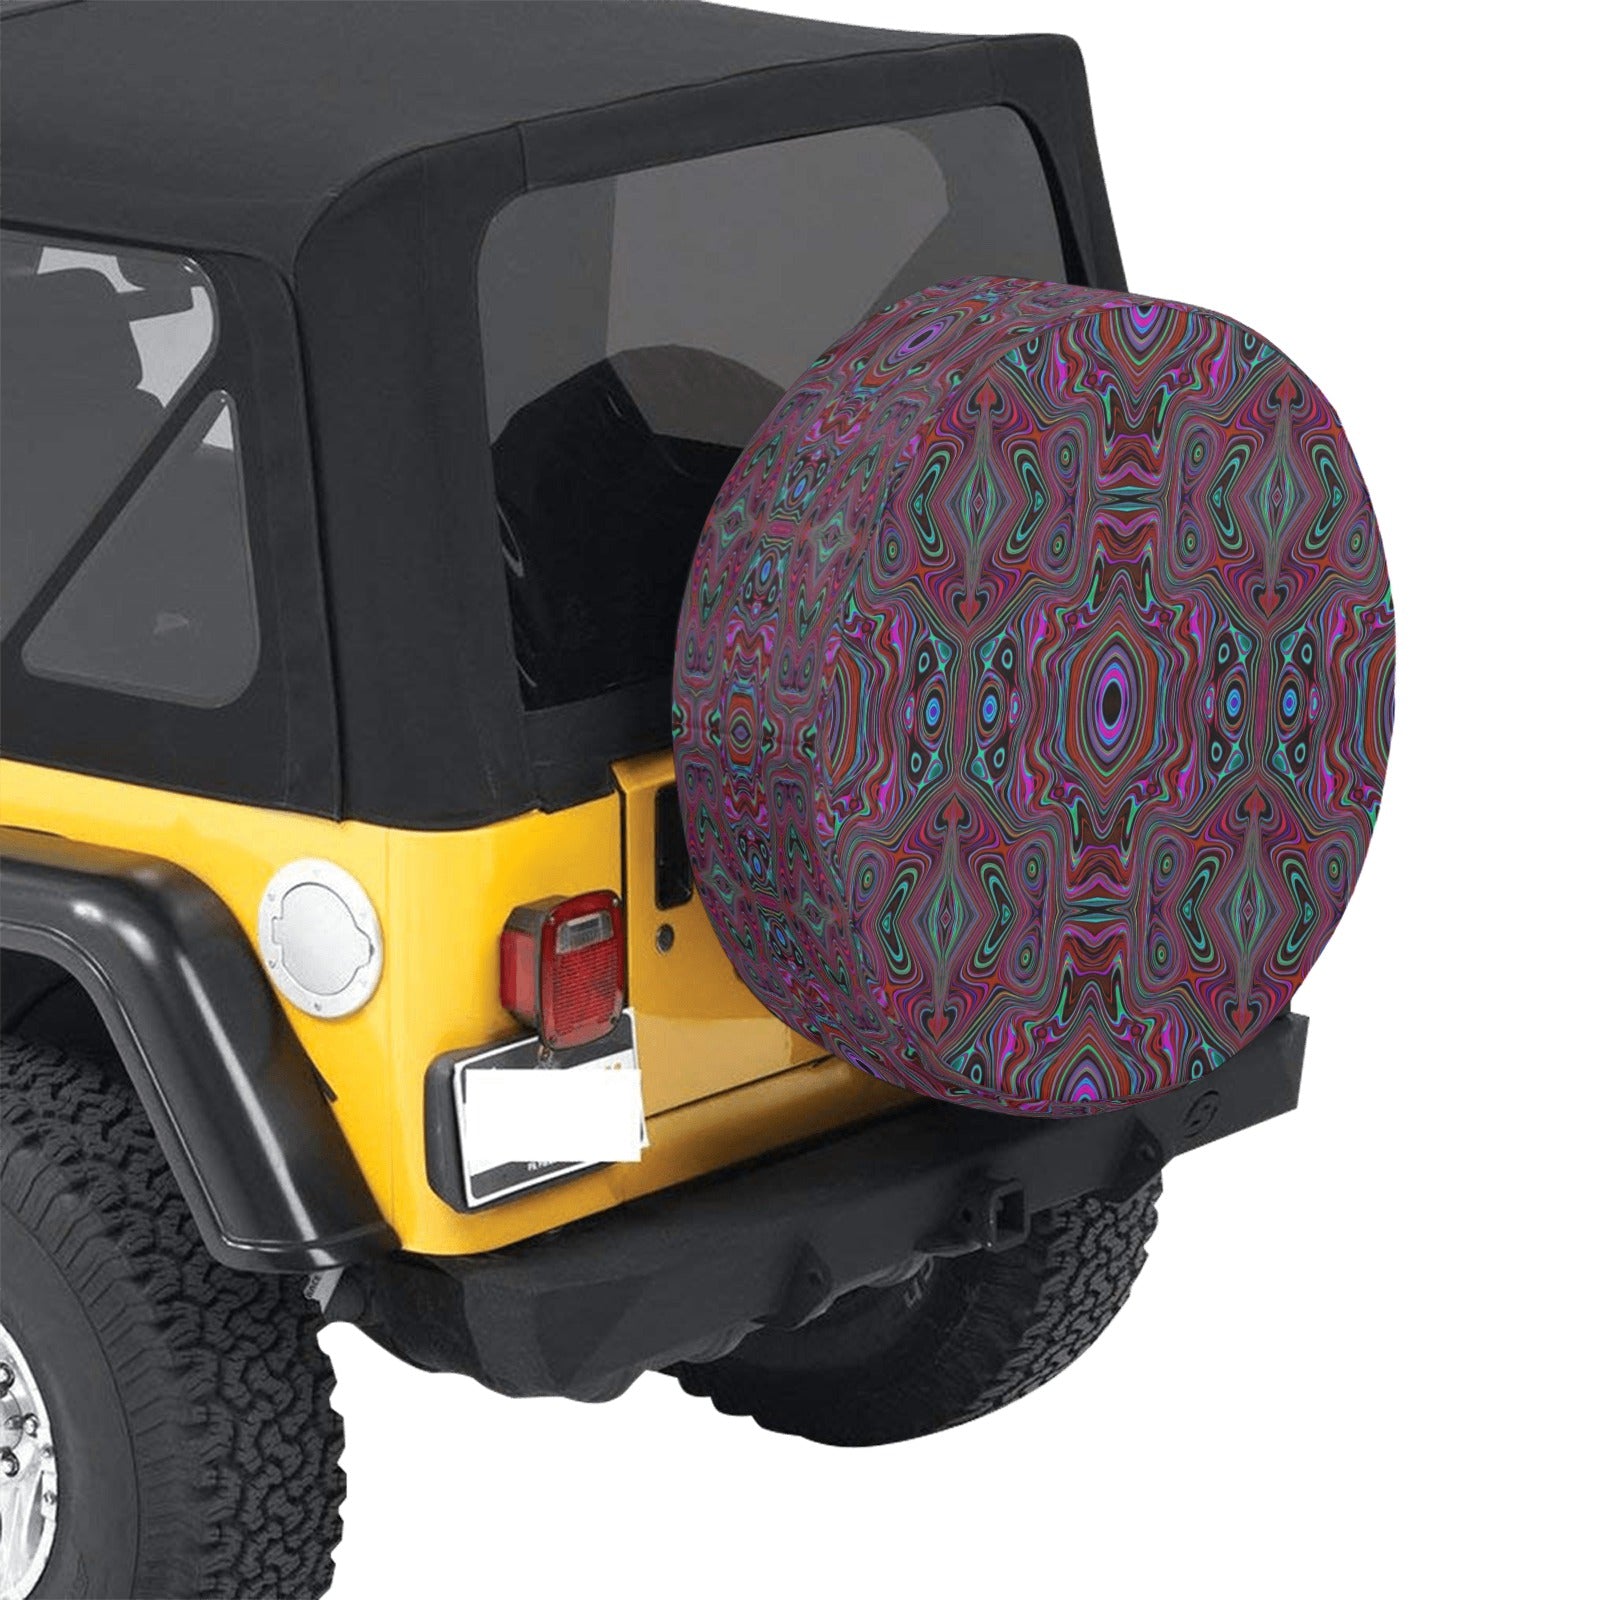 Spare Tire Covers, Trippy Seafoam Green and Magenta Abstract Pattern - Medium